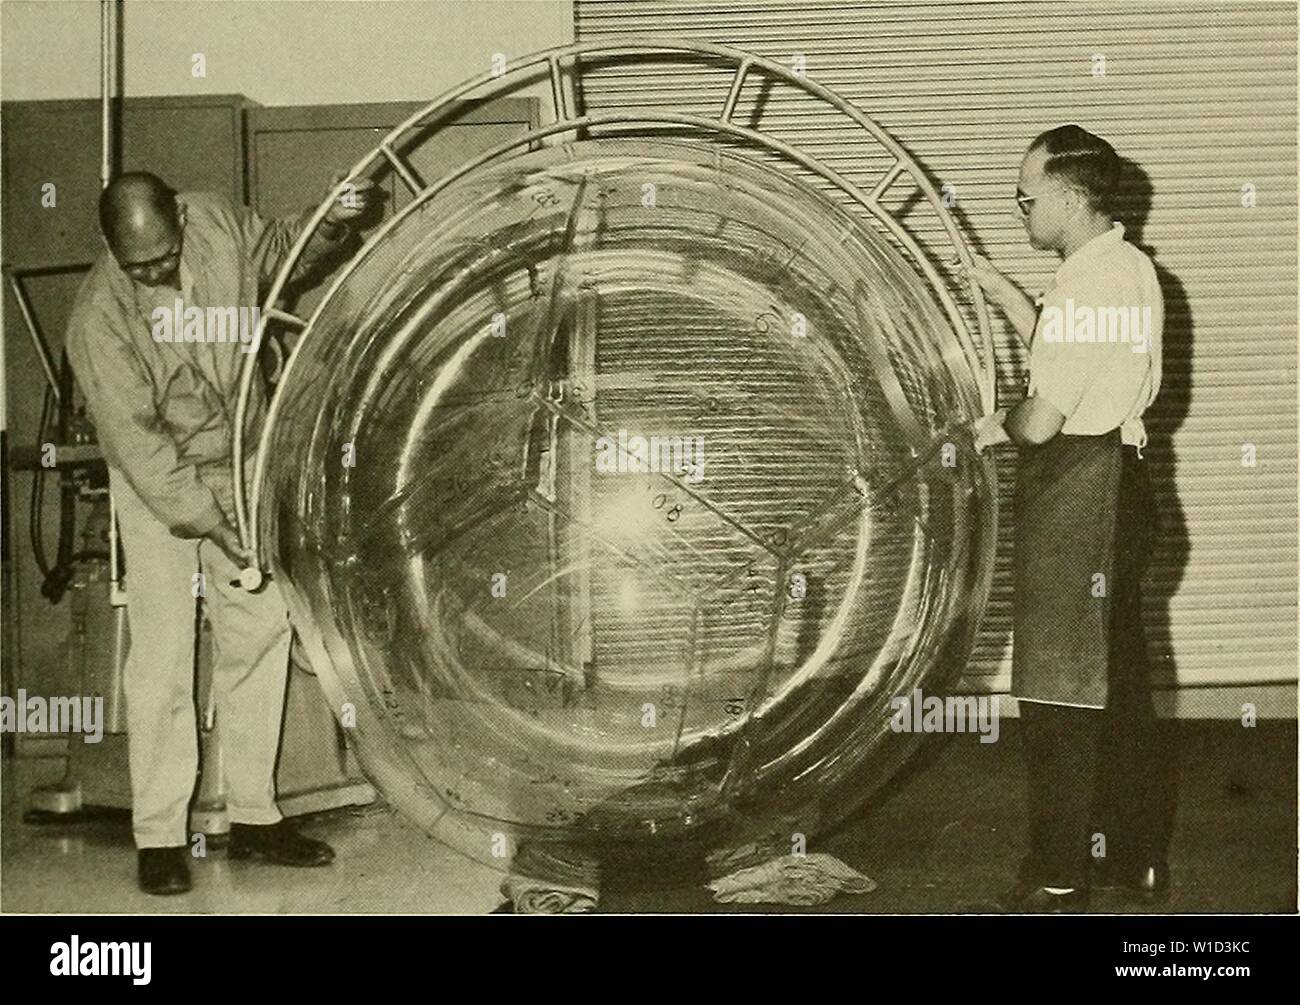 Archive image from page 88 of Development of a spherical acrylic. Development of a spherical acrylic plastic pressure hull for hydrospace application . developmentofsph00stac Year: 1970  to assembly varied from 2.285 to 2.585 inches and 30.702 to 30.345 inches, respectively, while the external sphericity and the diameter of the assembled capsule varied from 33.134 to 33.000 inches and 66.158 to 65.920 inches, respectively. The difference between sphericity measurements taken on indi- vidual pentagons and on the finished hull are attributed in a large measure to (1) mismatch between individual Stock Photo